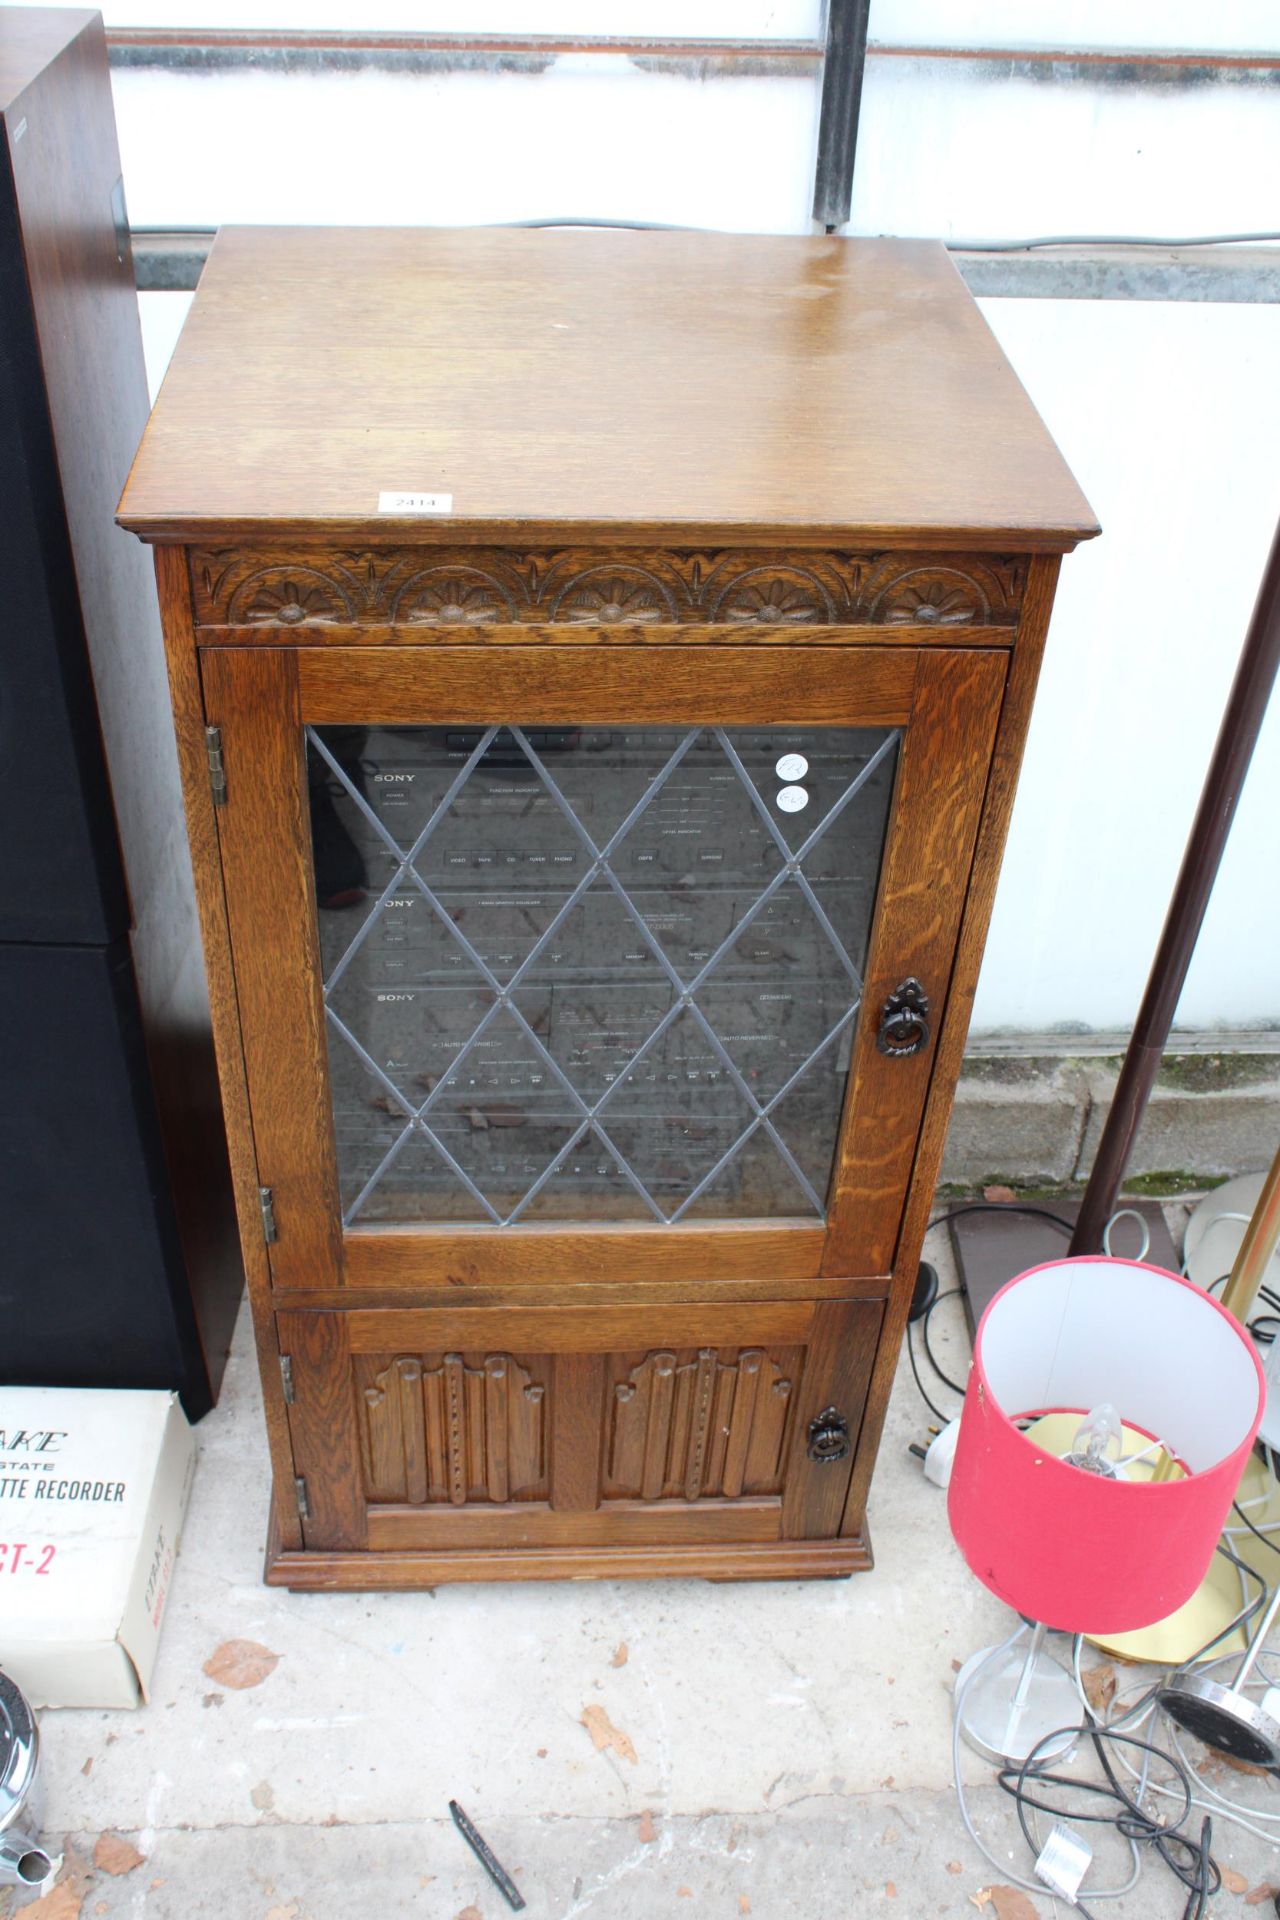 AN OAK RECORD CABINET CONTAINING A SONY COMPACT HI-FI STEREO SYSTEM